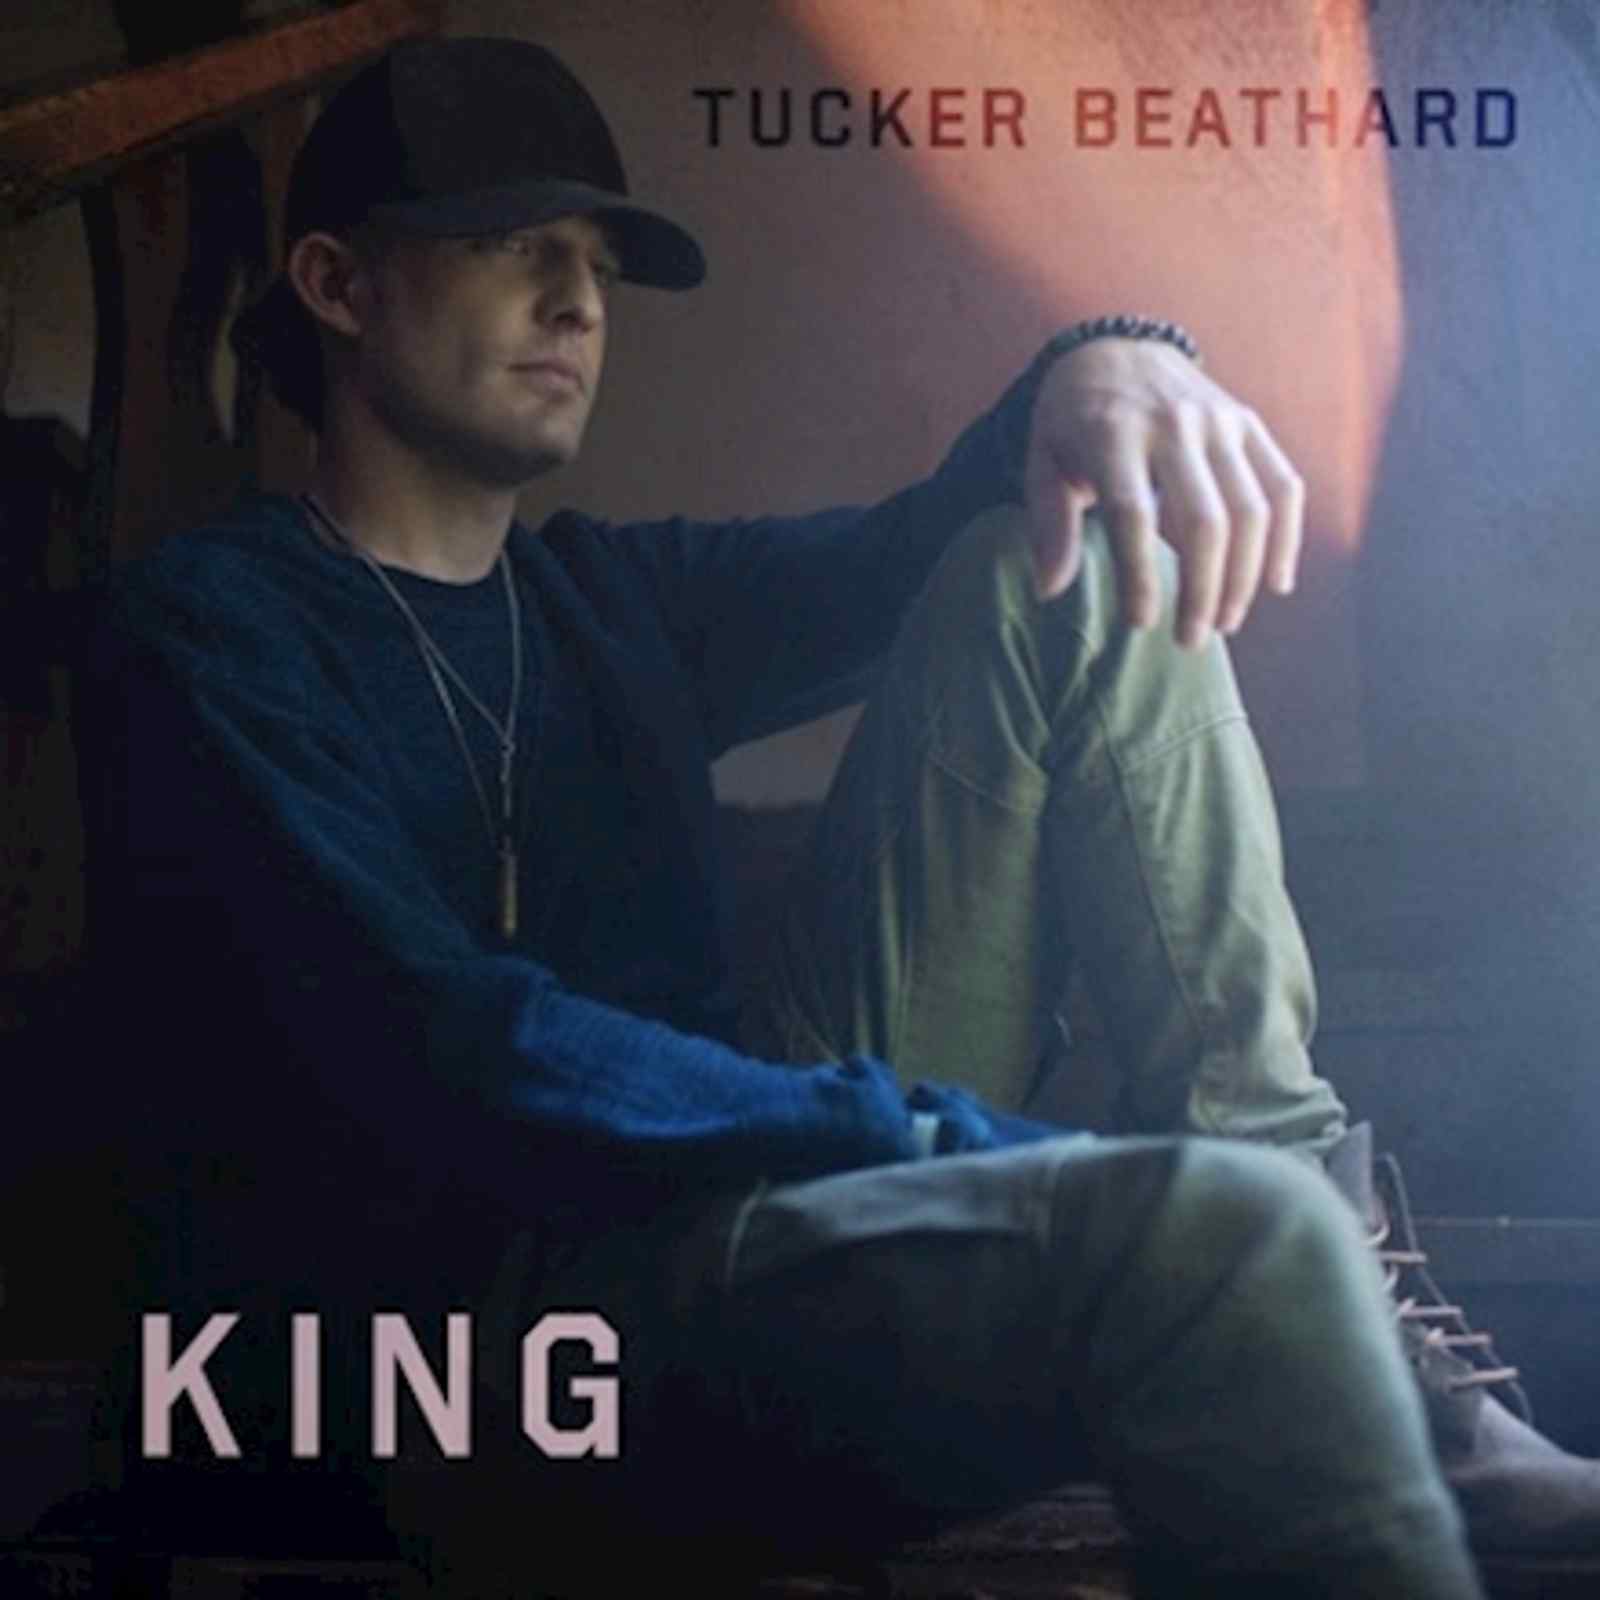 Song Release: "I Ain't Without You" by Tucker Beathard